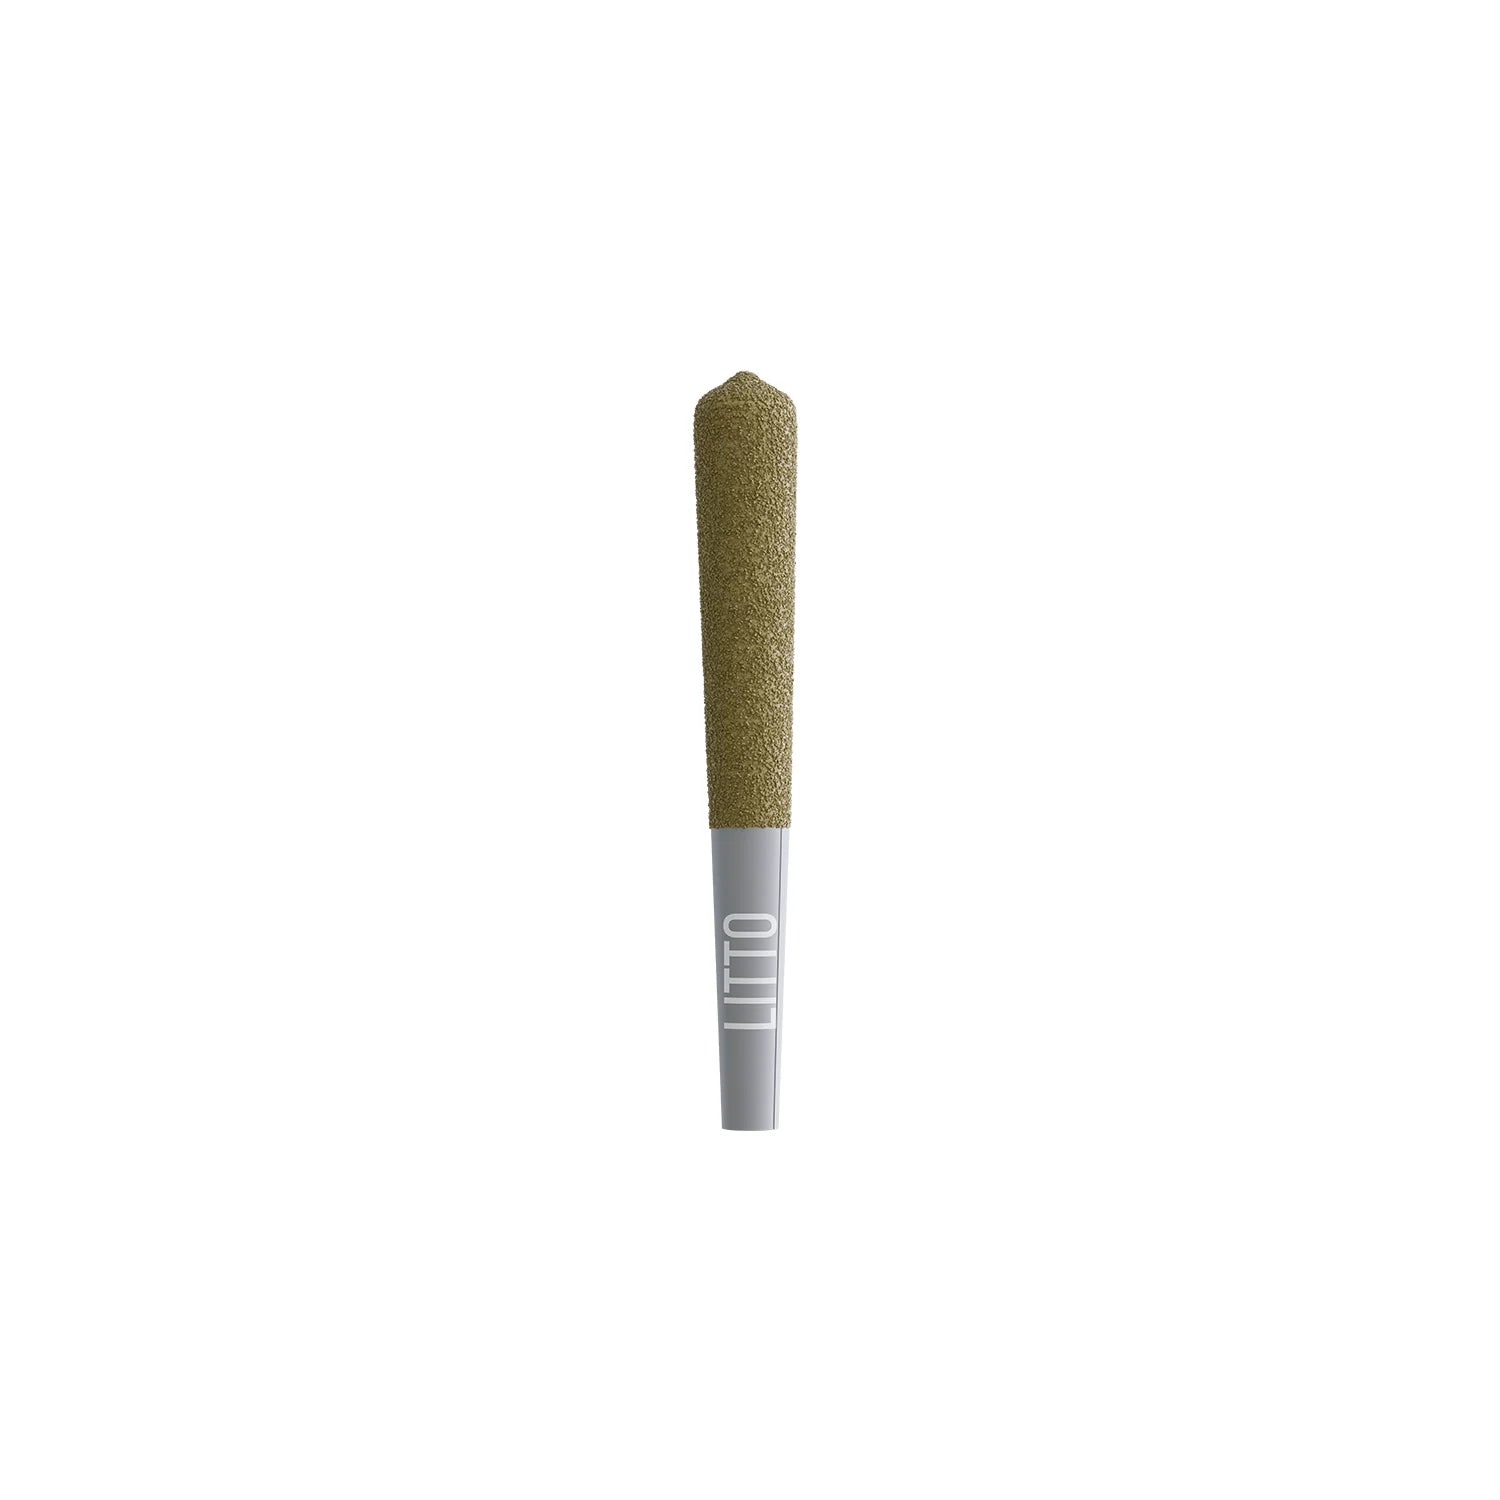 .5G PRE ROLLS 6 COUNT BY LITTO